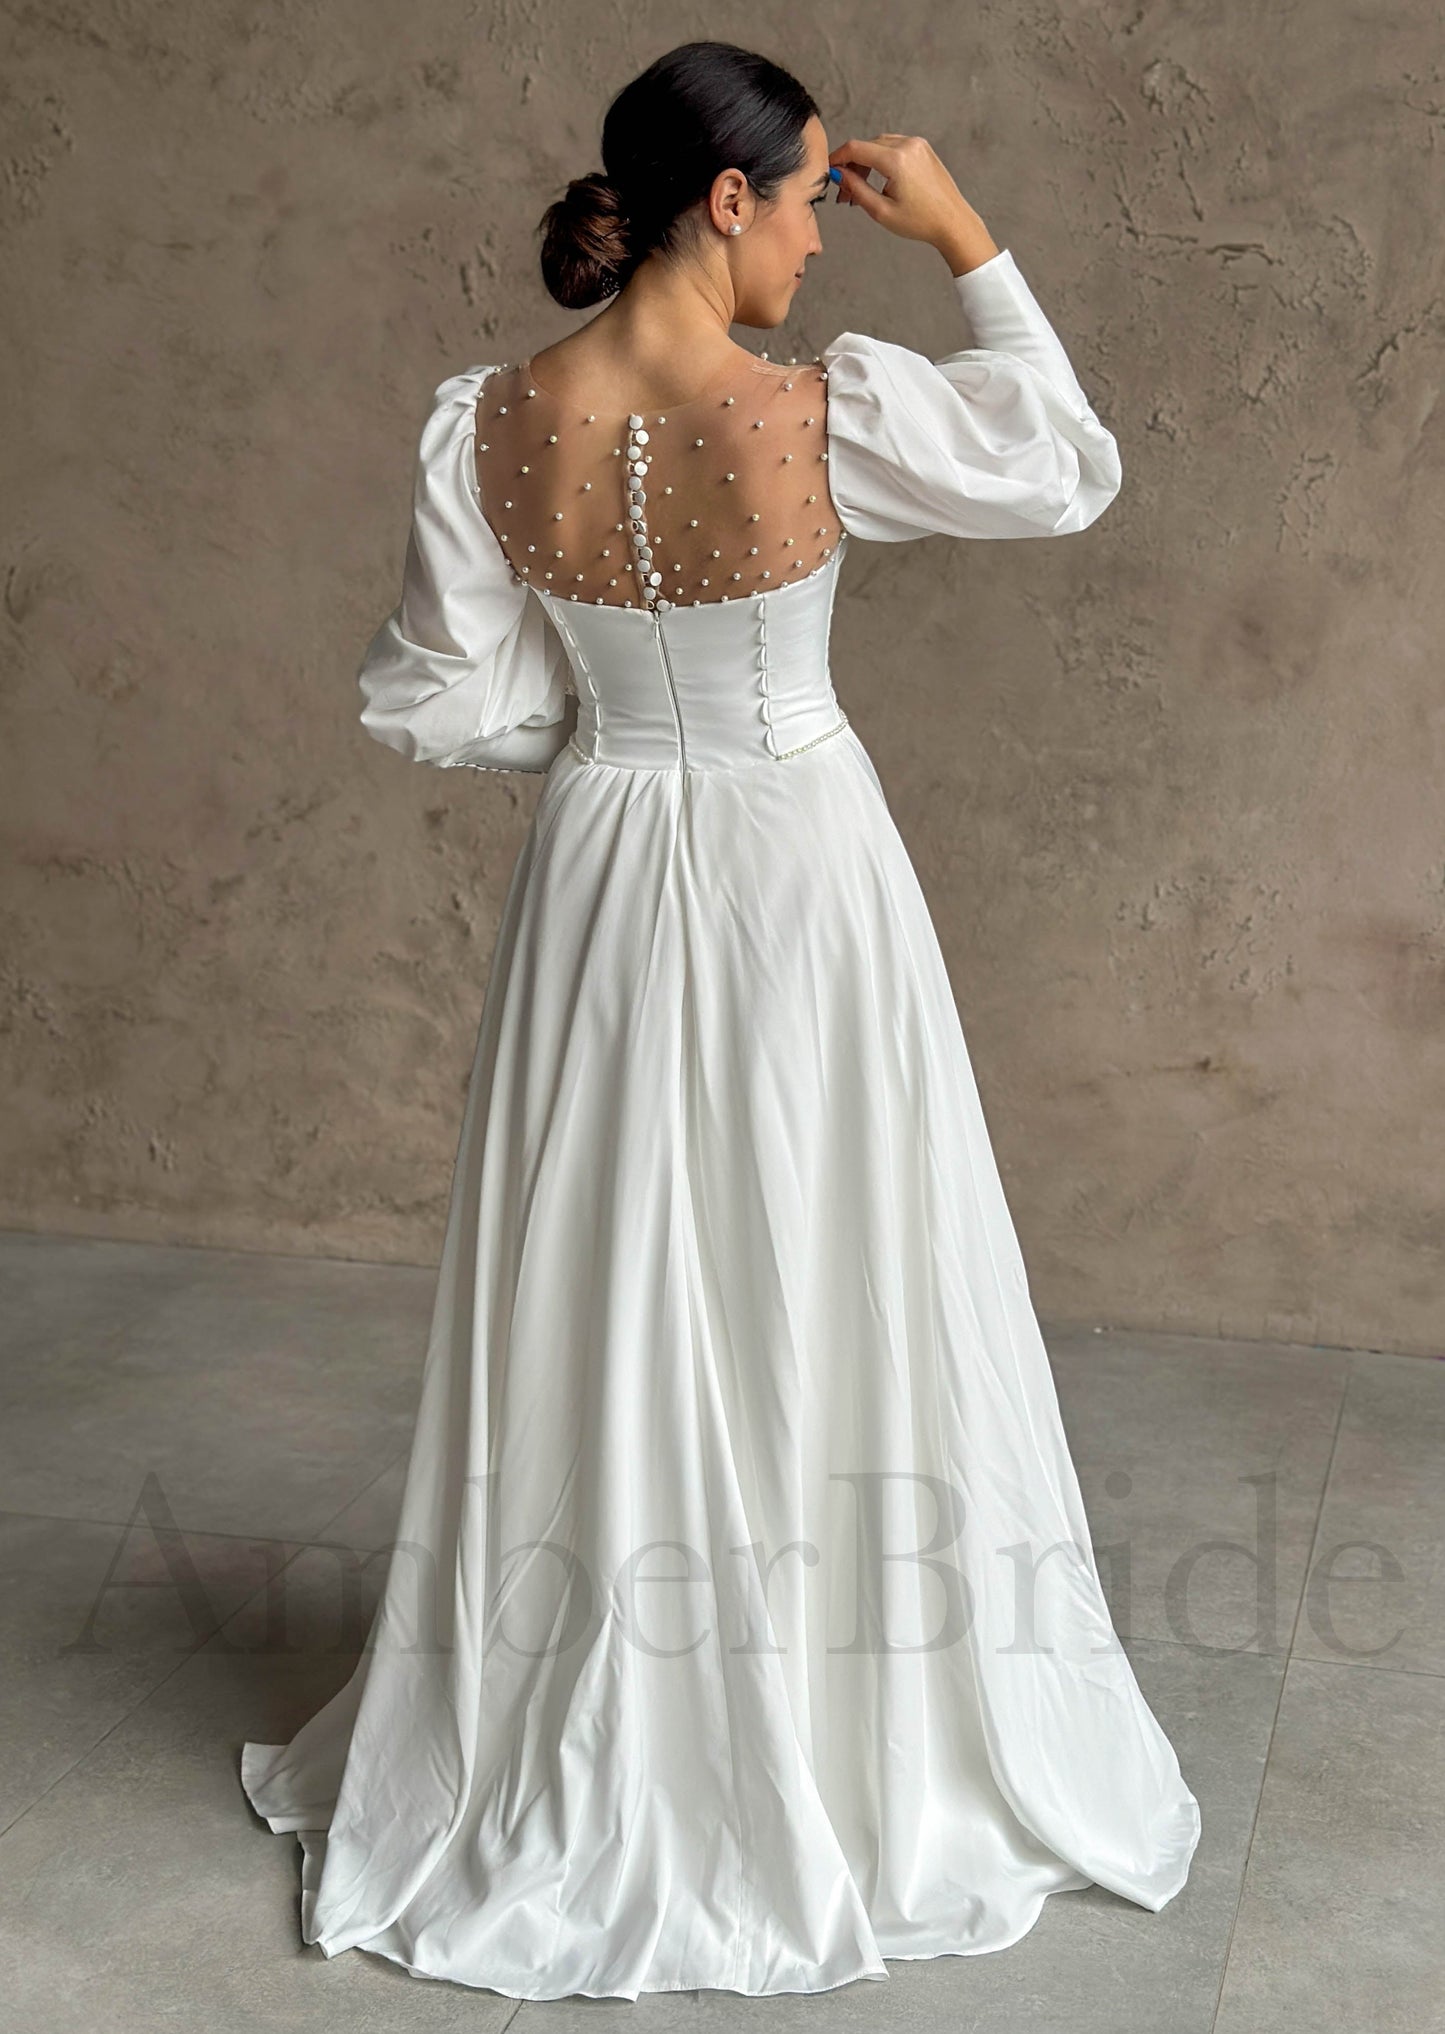 Exquisite A Line Satin Wedding Dress with Bishop Sleeves and Illusion Pearls Design